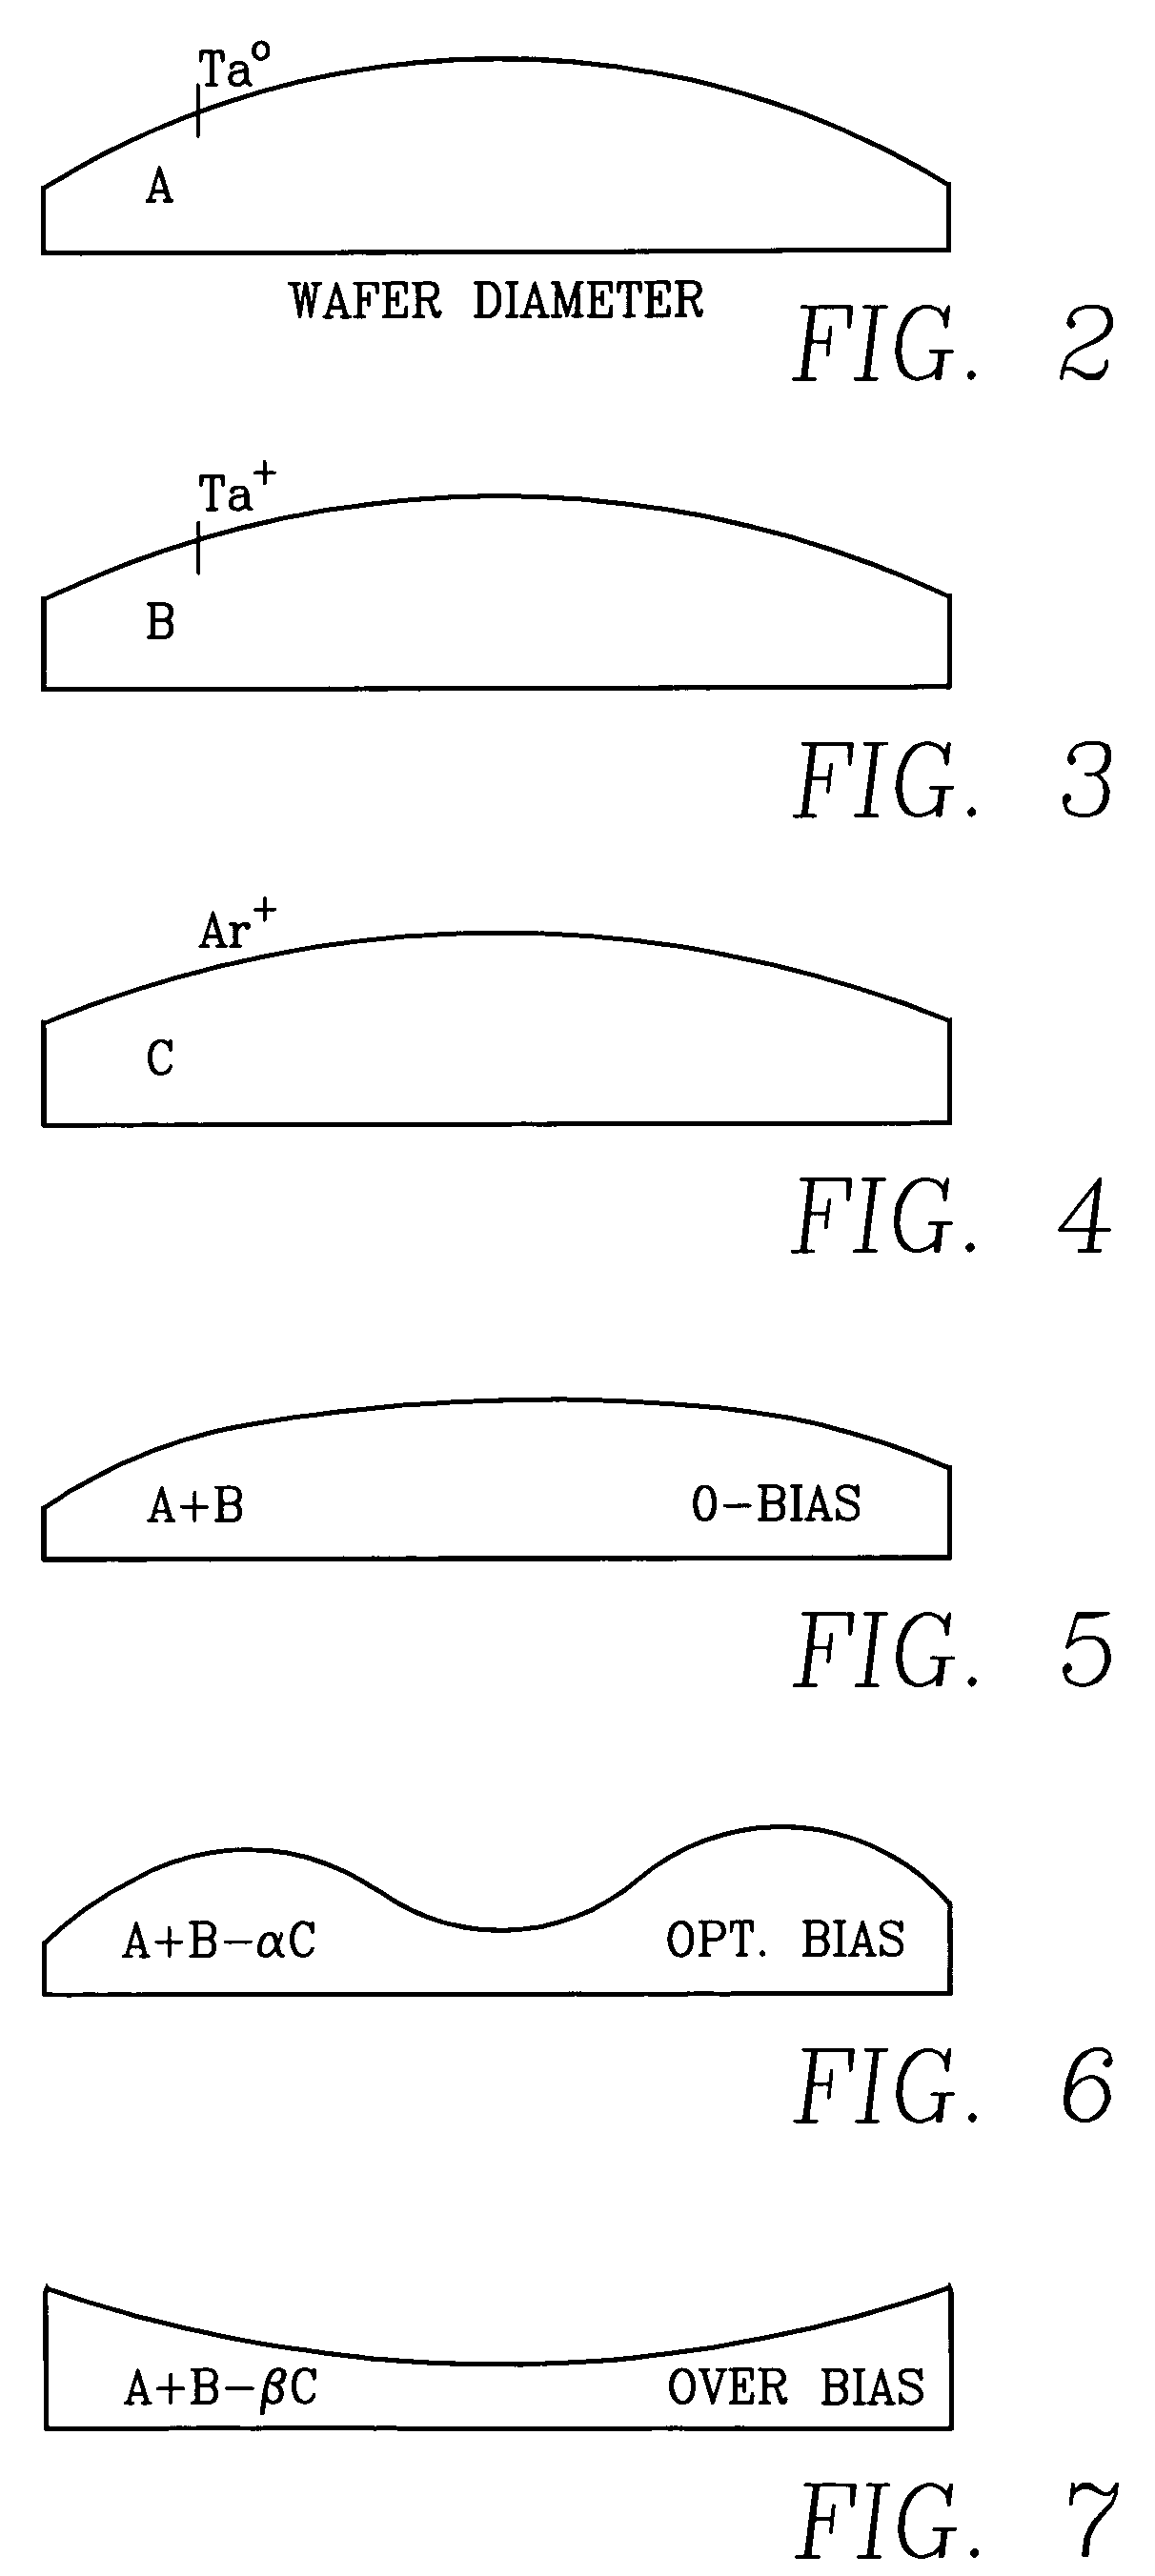 Multi-step process for forming a metal barrier in a sputter reactor